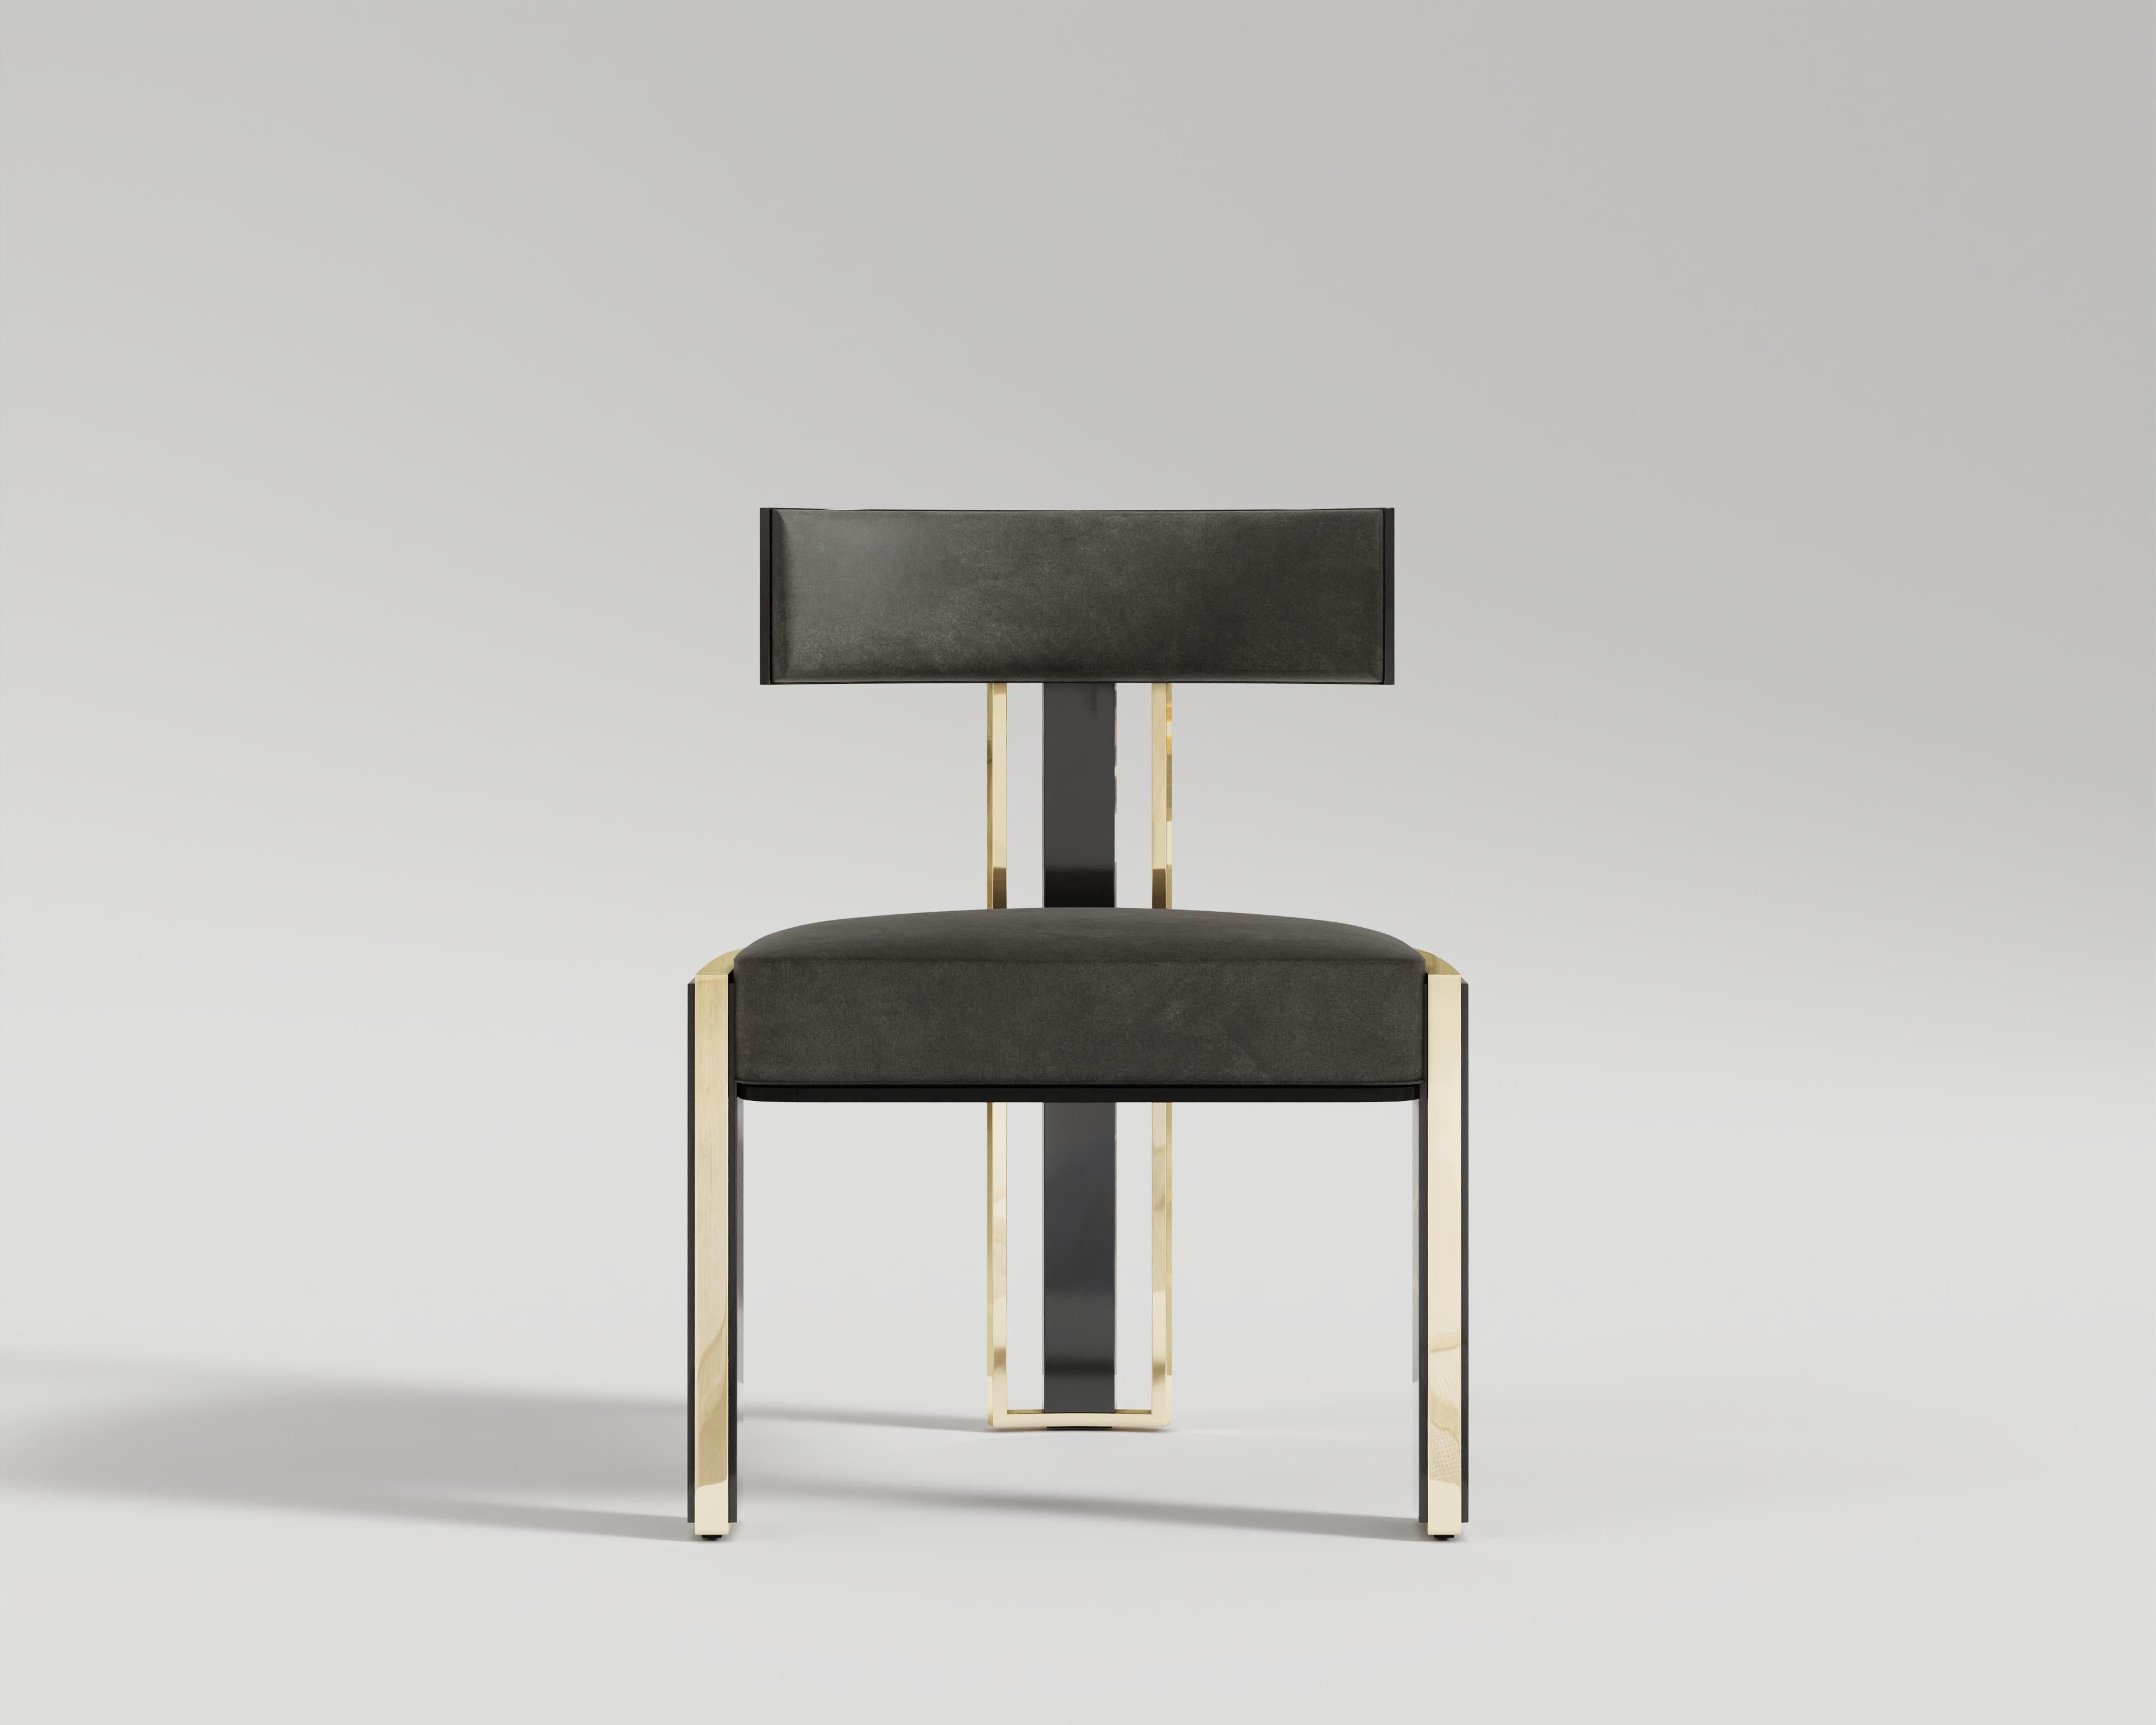 Bellus Dining Chair
Delight in the sophisticated and delicate silhouette of the Bellus Dining Chair. With the intricate, gleaming metal frame and beautifully curved back, the Bellus unites everyday elegance with an understated design.

Materials and